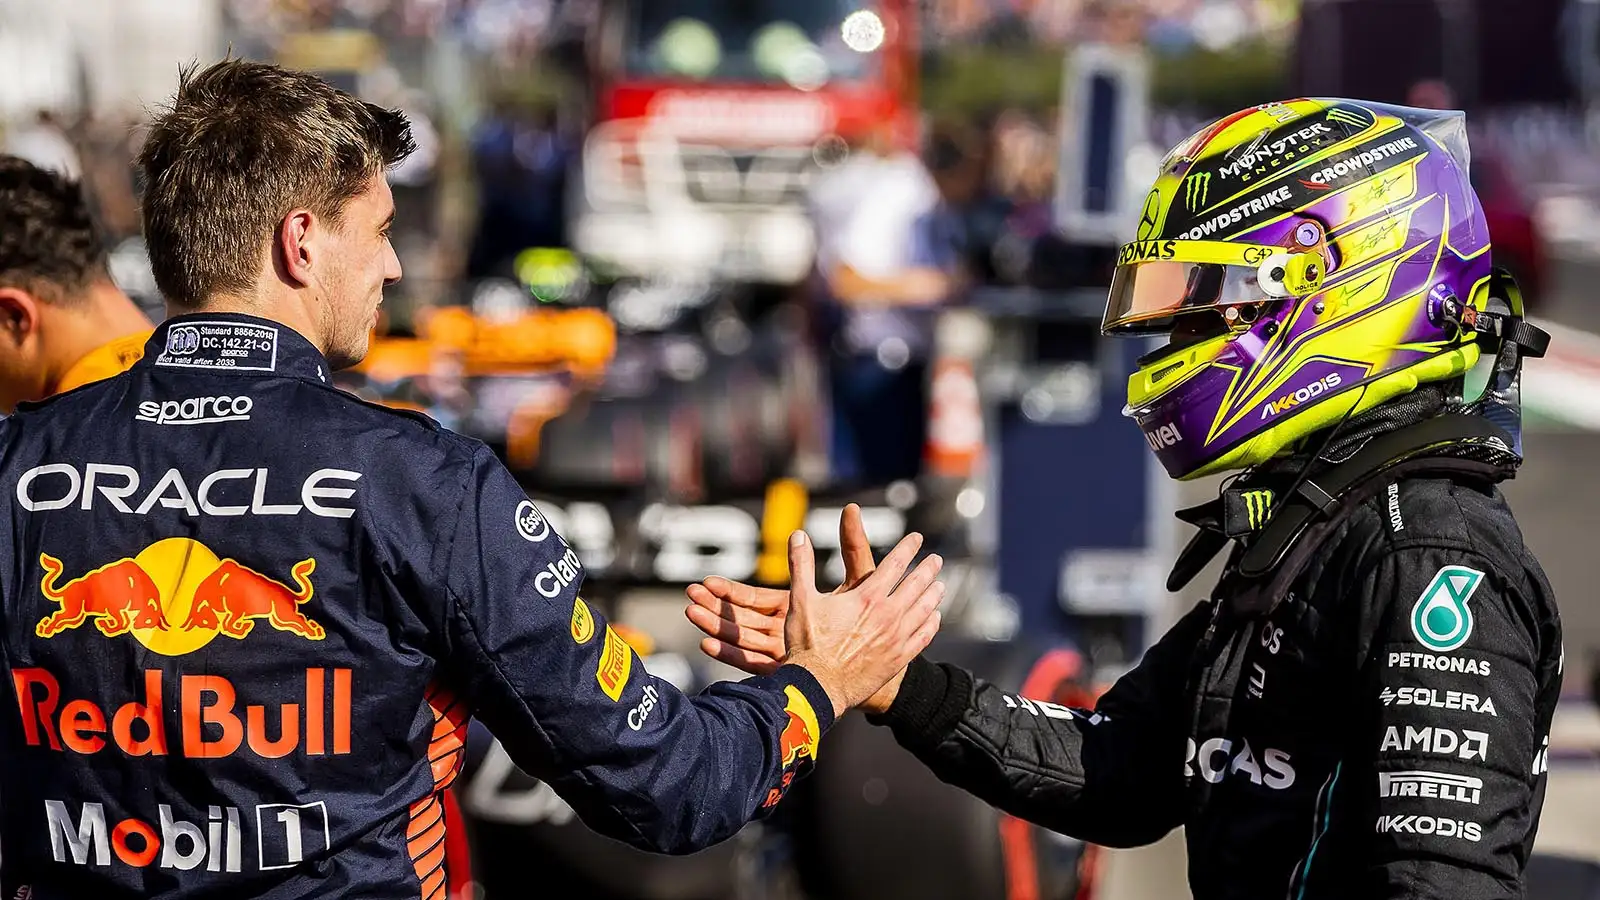 F1 rivals Lewis Hamilton and Max Verstappen shake hands at the Hungarian Grand Prix